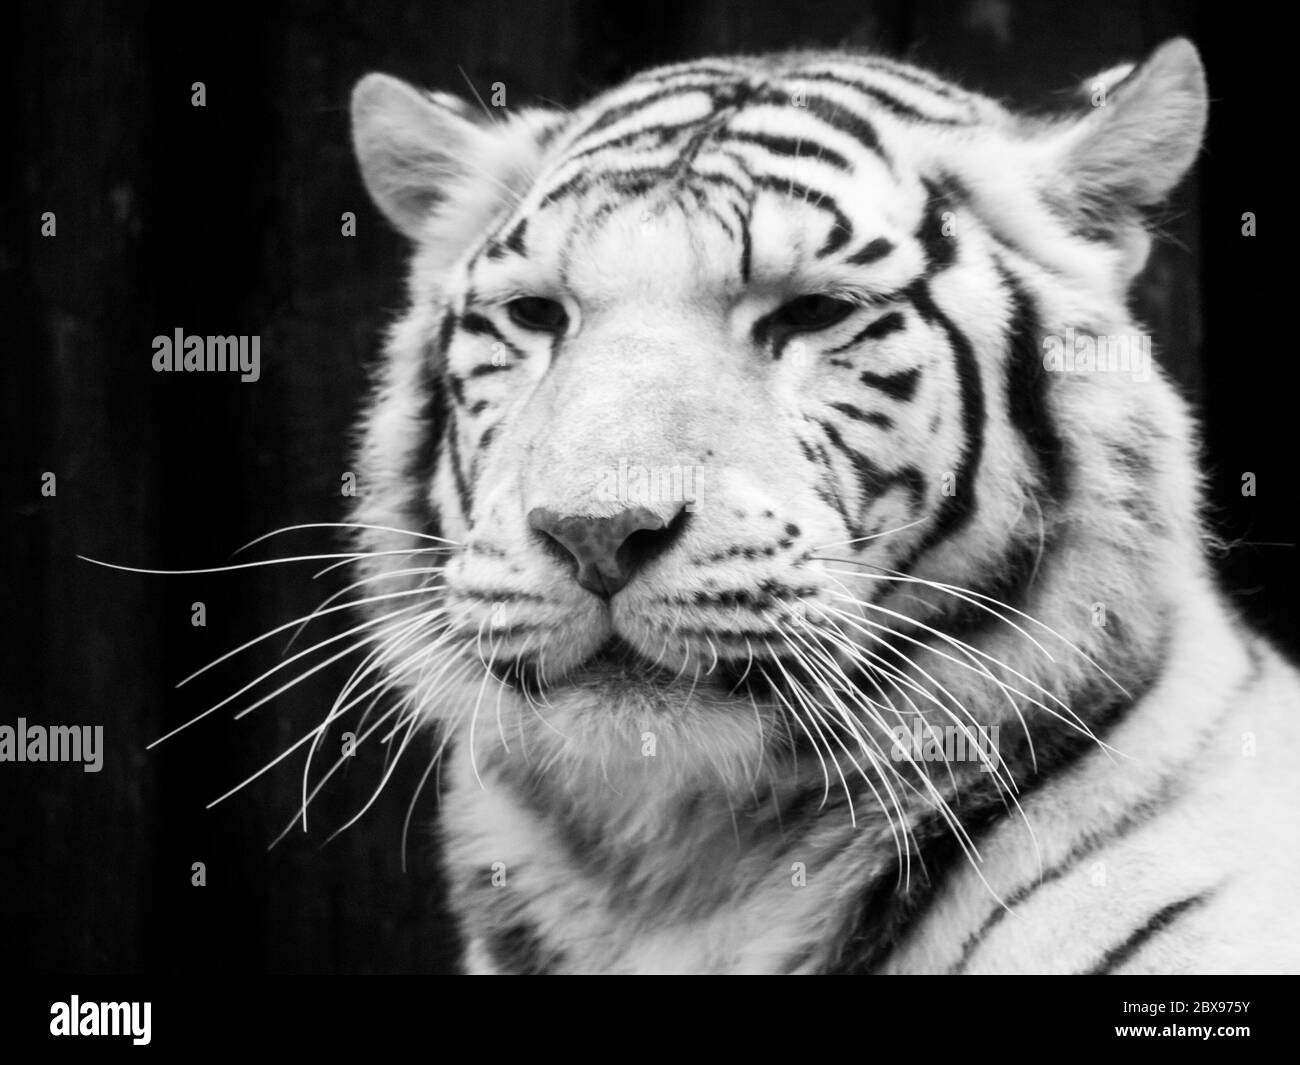 White tiger Black and White Stock Photos & Images - Alamy